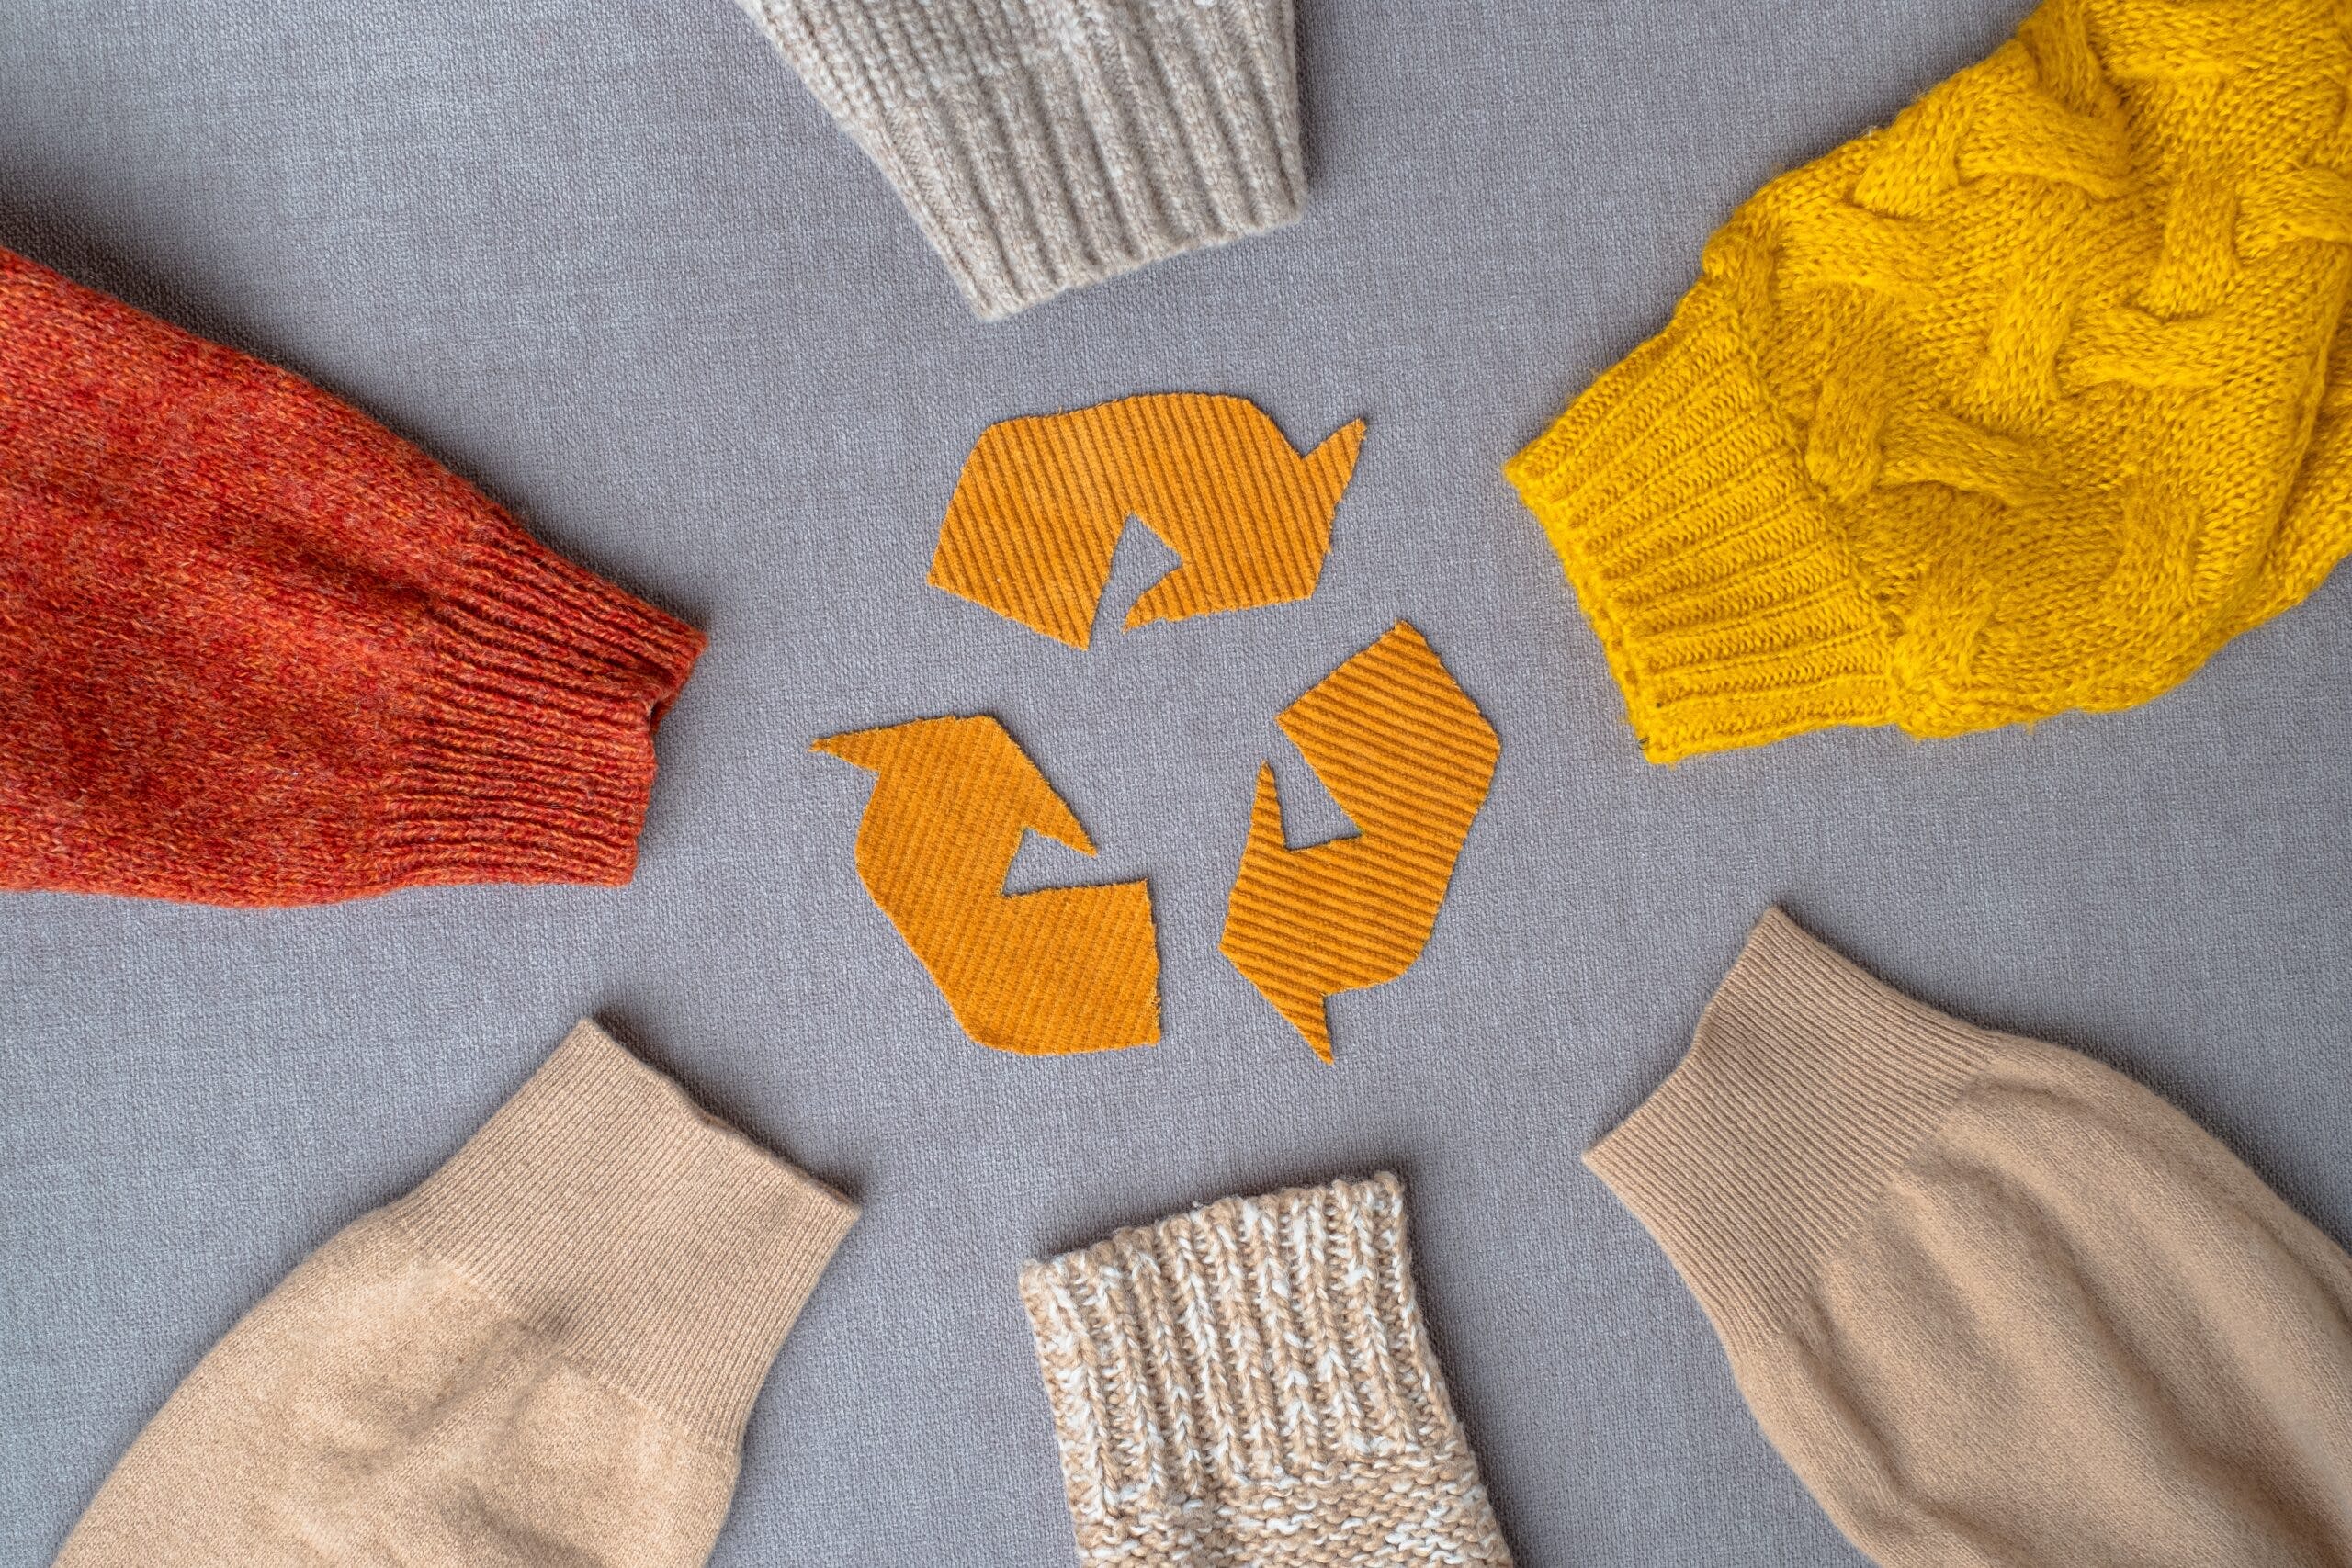 Six jumper sleeves are circled around a recycling symbol, showing sustainable fashion clothing is an option